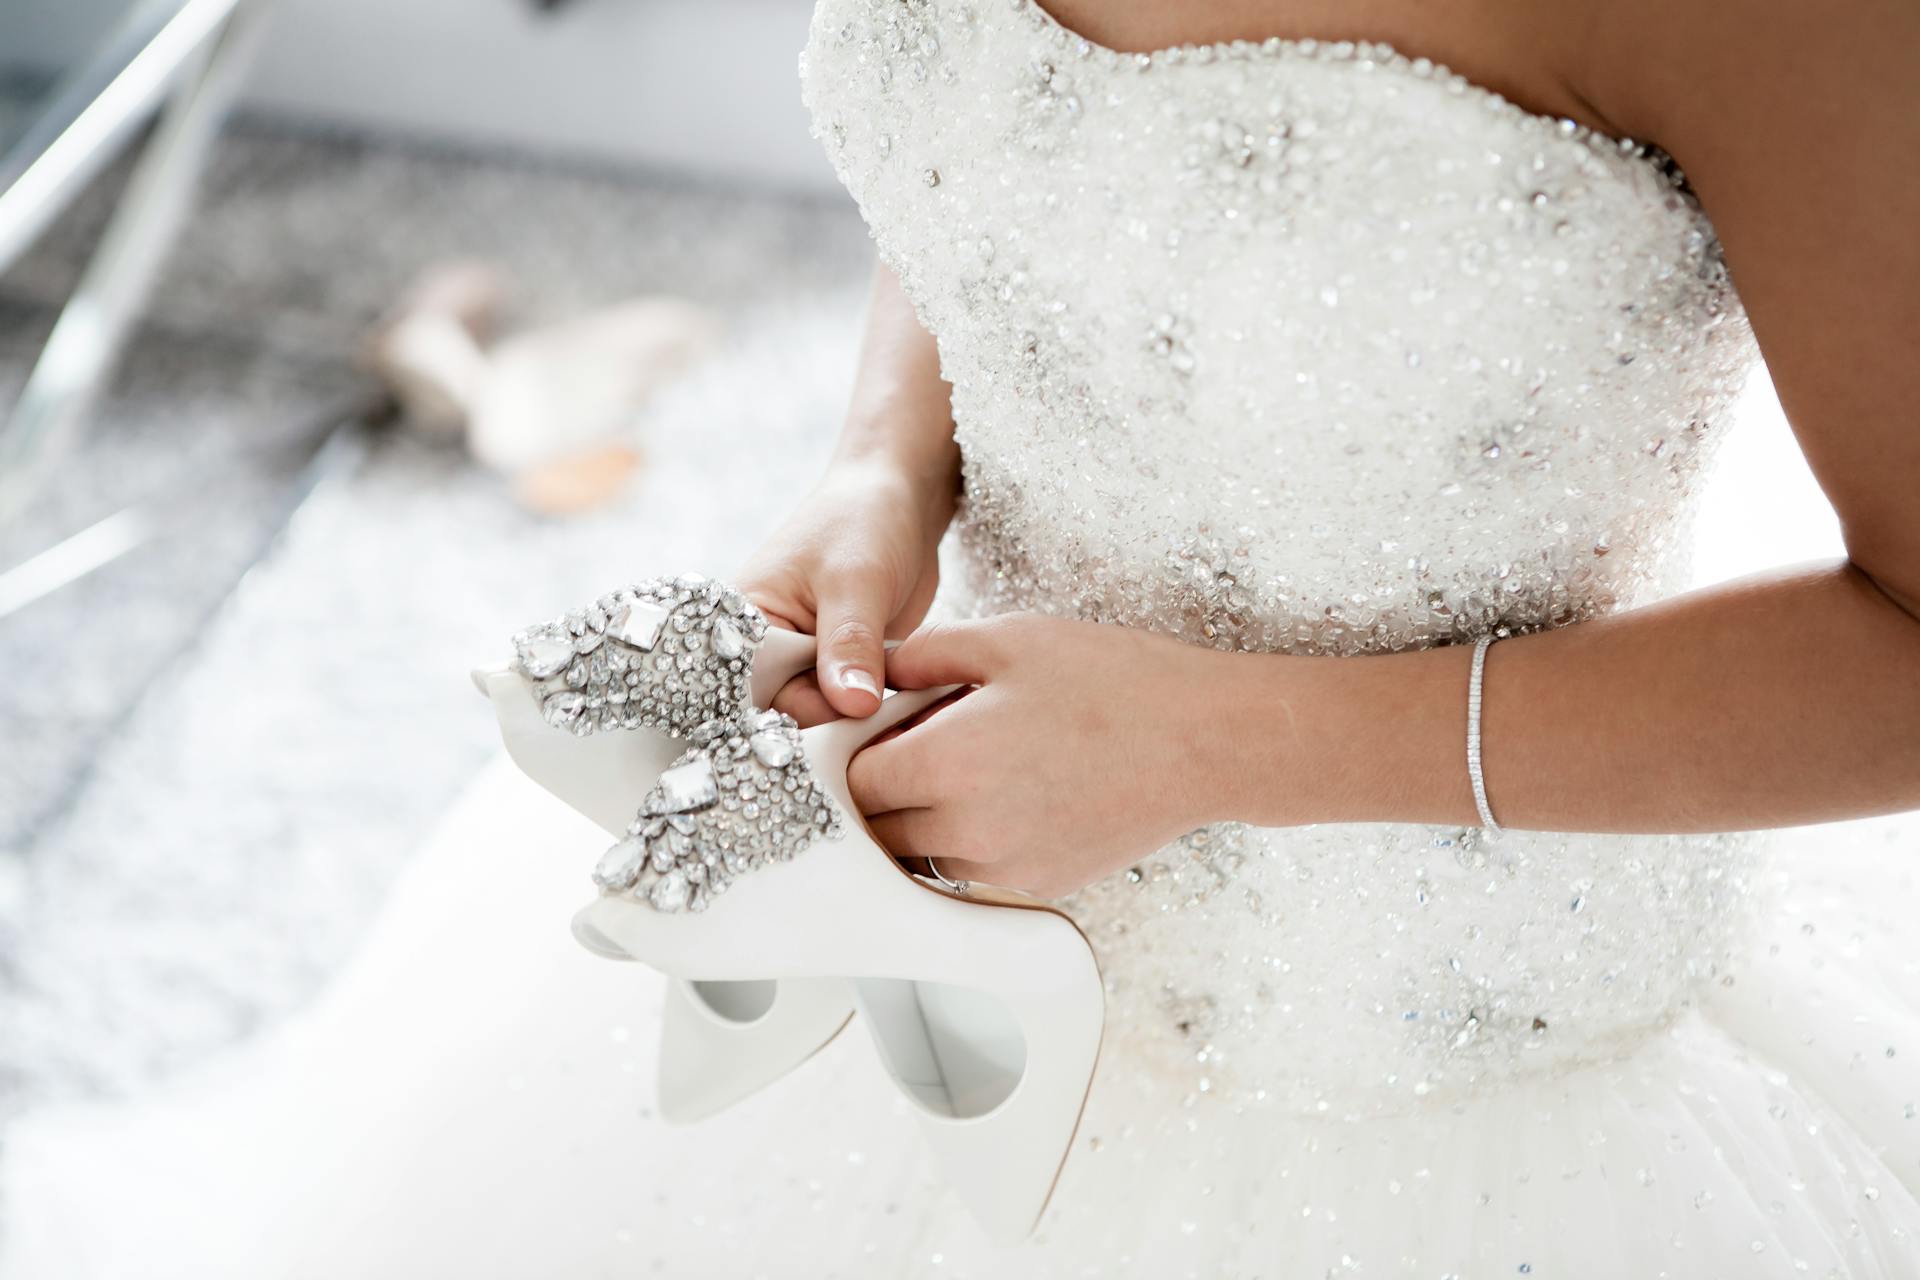 A bride holding her shoes | Source: Pexels